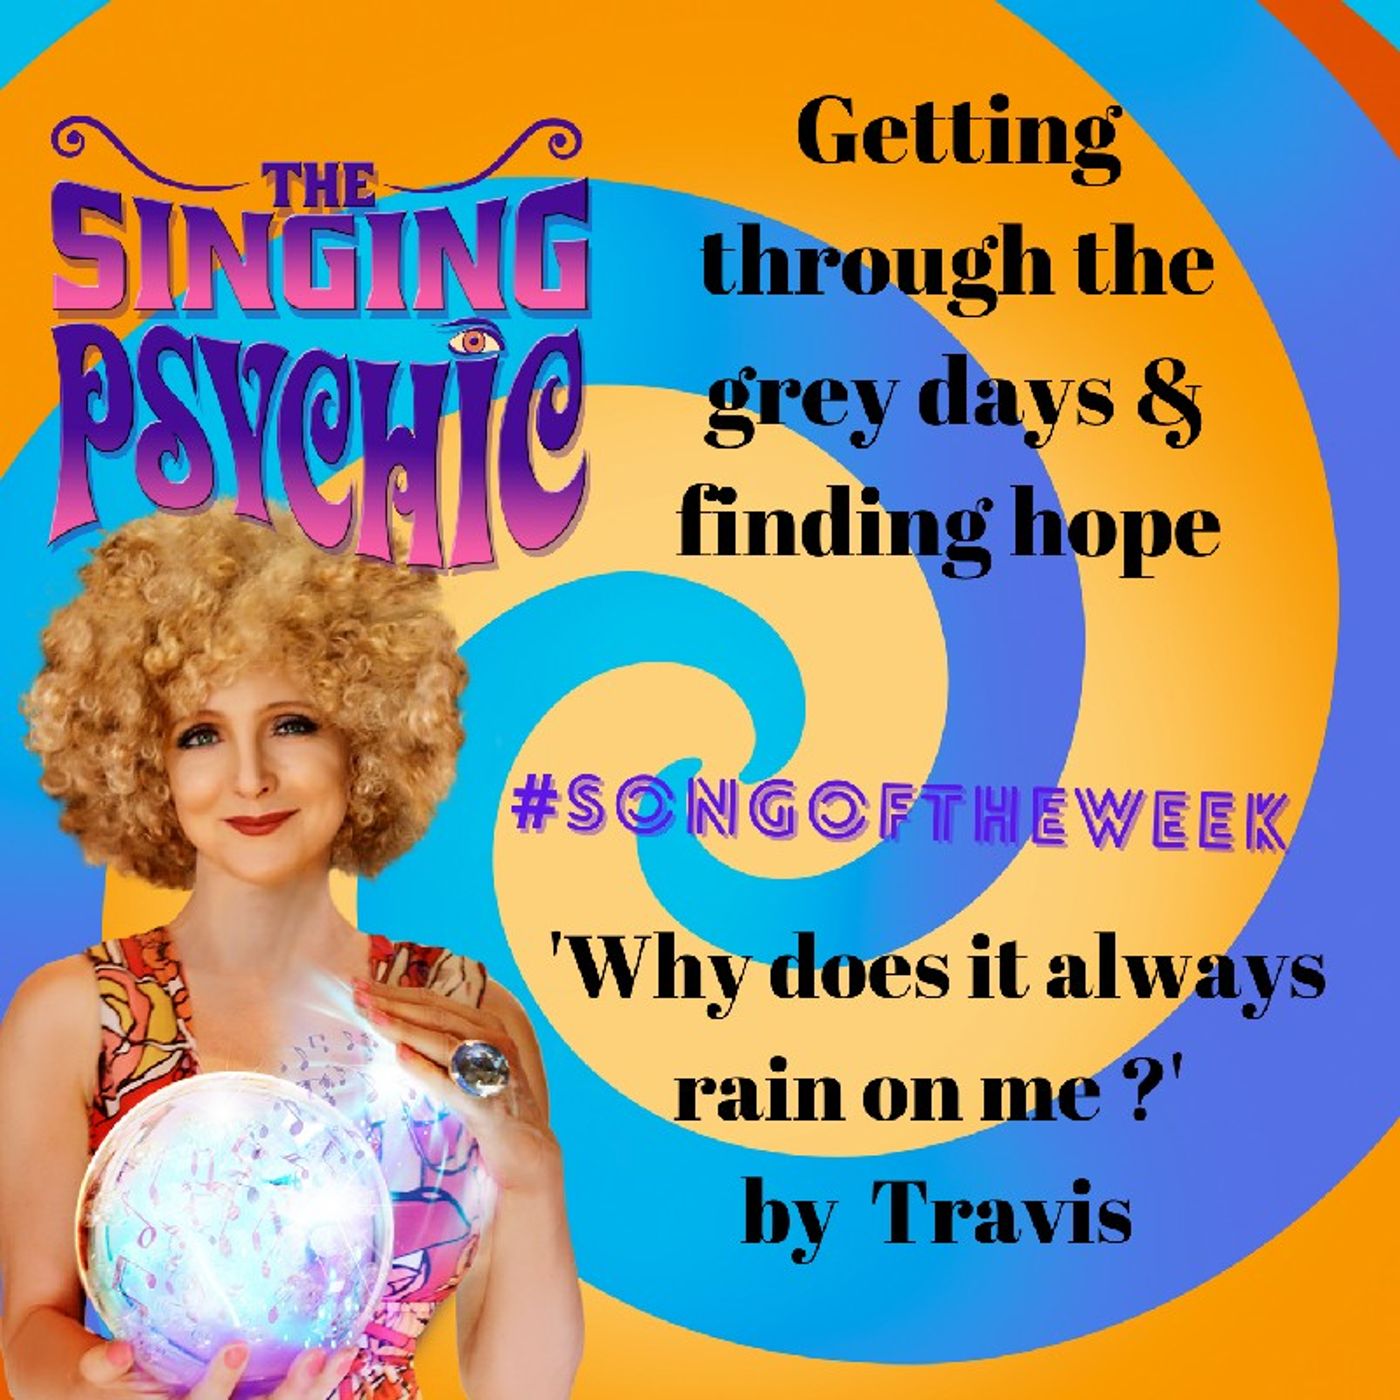 Why Does It Always Rain On Me By Travis #SongOfTheWeek Episode 67 - The Singing Psychic